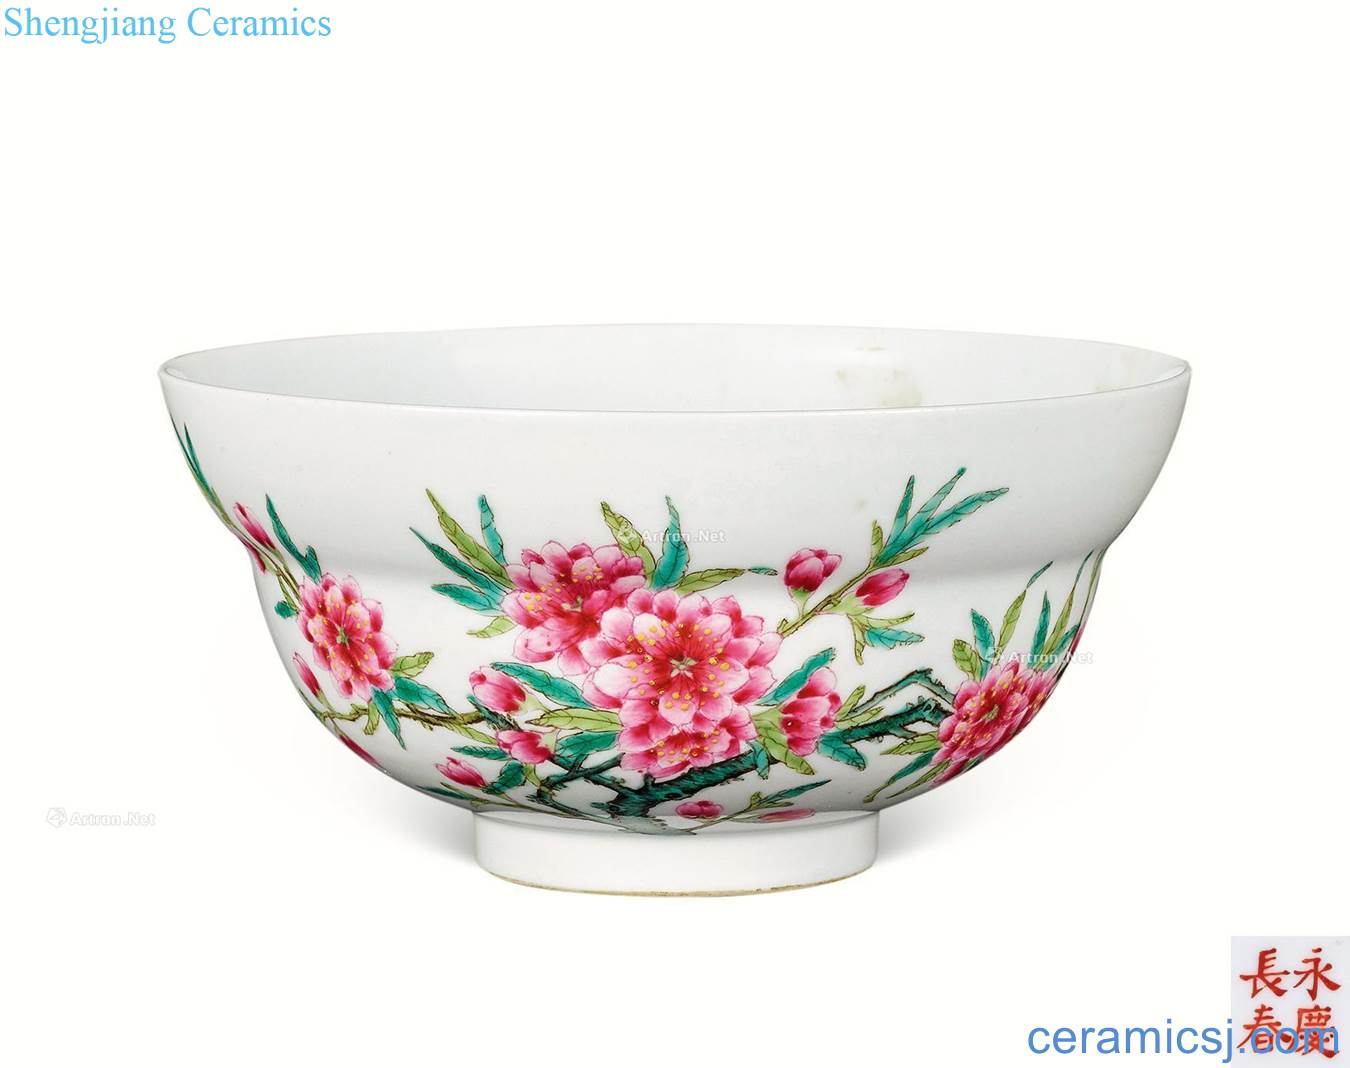 In the qing dynasty pastel flowers green-splashed bowls